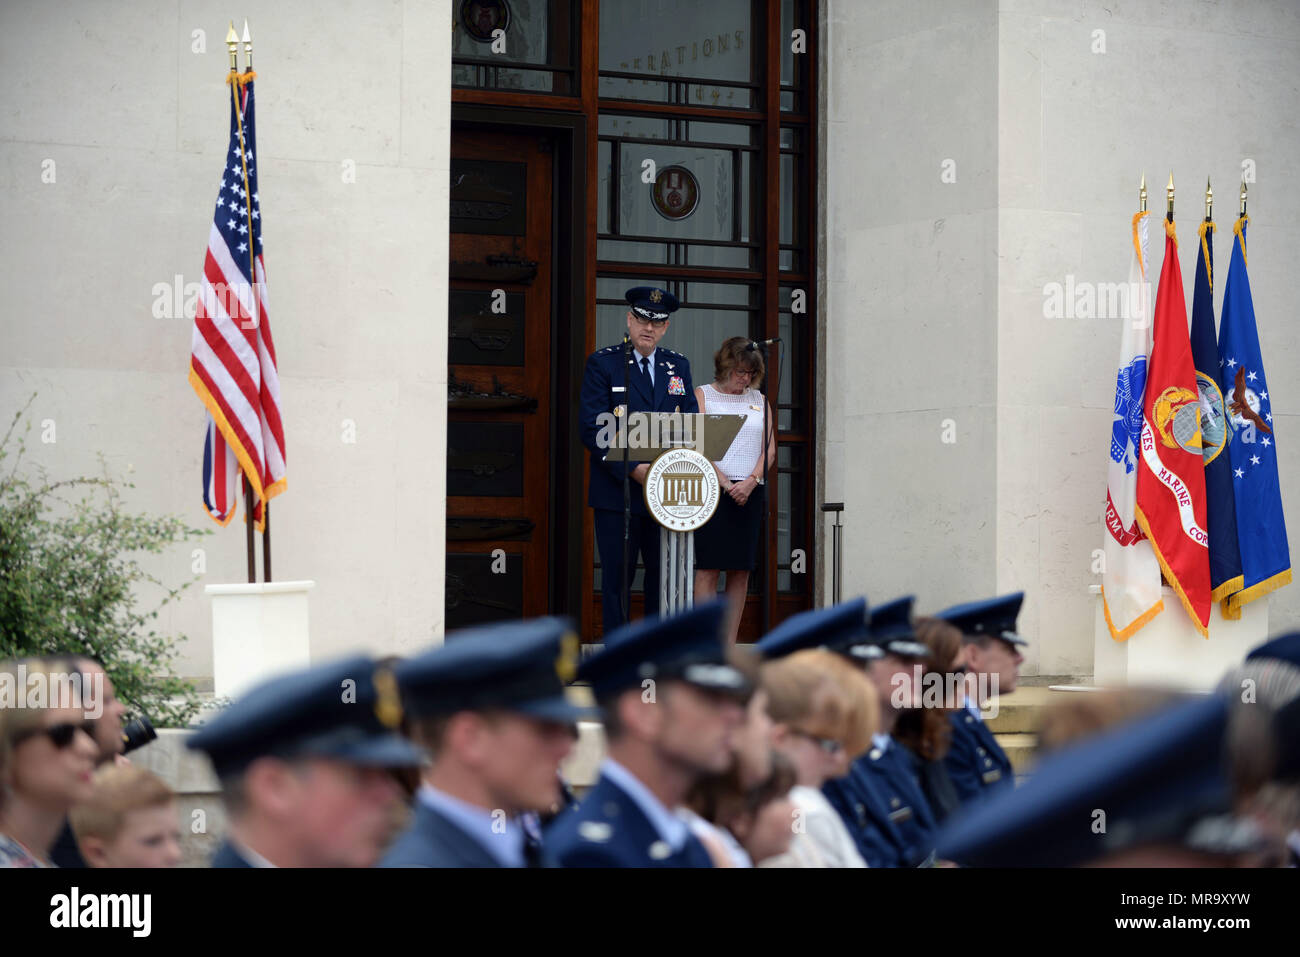 U.S. Air Force Maj. Gen. Timothy G. Fay, Headquarters U.S. Air Forces in Europe and Air Forces Africa director, operations, strategic deterrence and nuclear integration, speaks to an audience during the Madingley Memorial Day Ceremony May 29, 2017, at Madingley Memorial Cemetery in Cambridge, England. The event included a wreath laying, fly overs and a firing of volleys. (U.S. Air Force photo by Senior Airman Christine Groening) Stock Photo